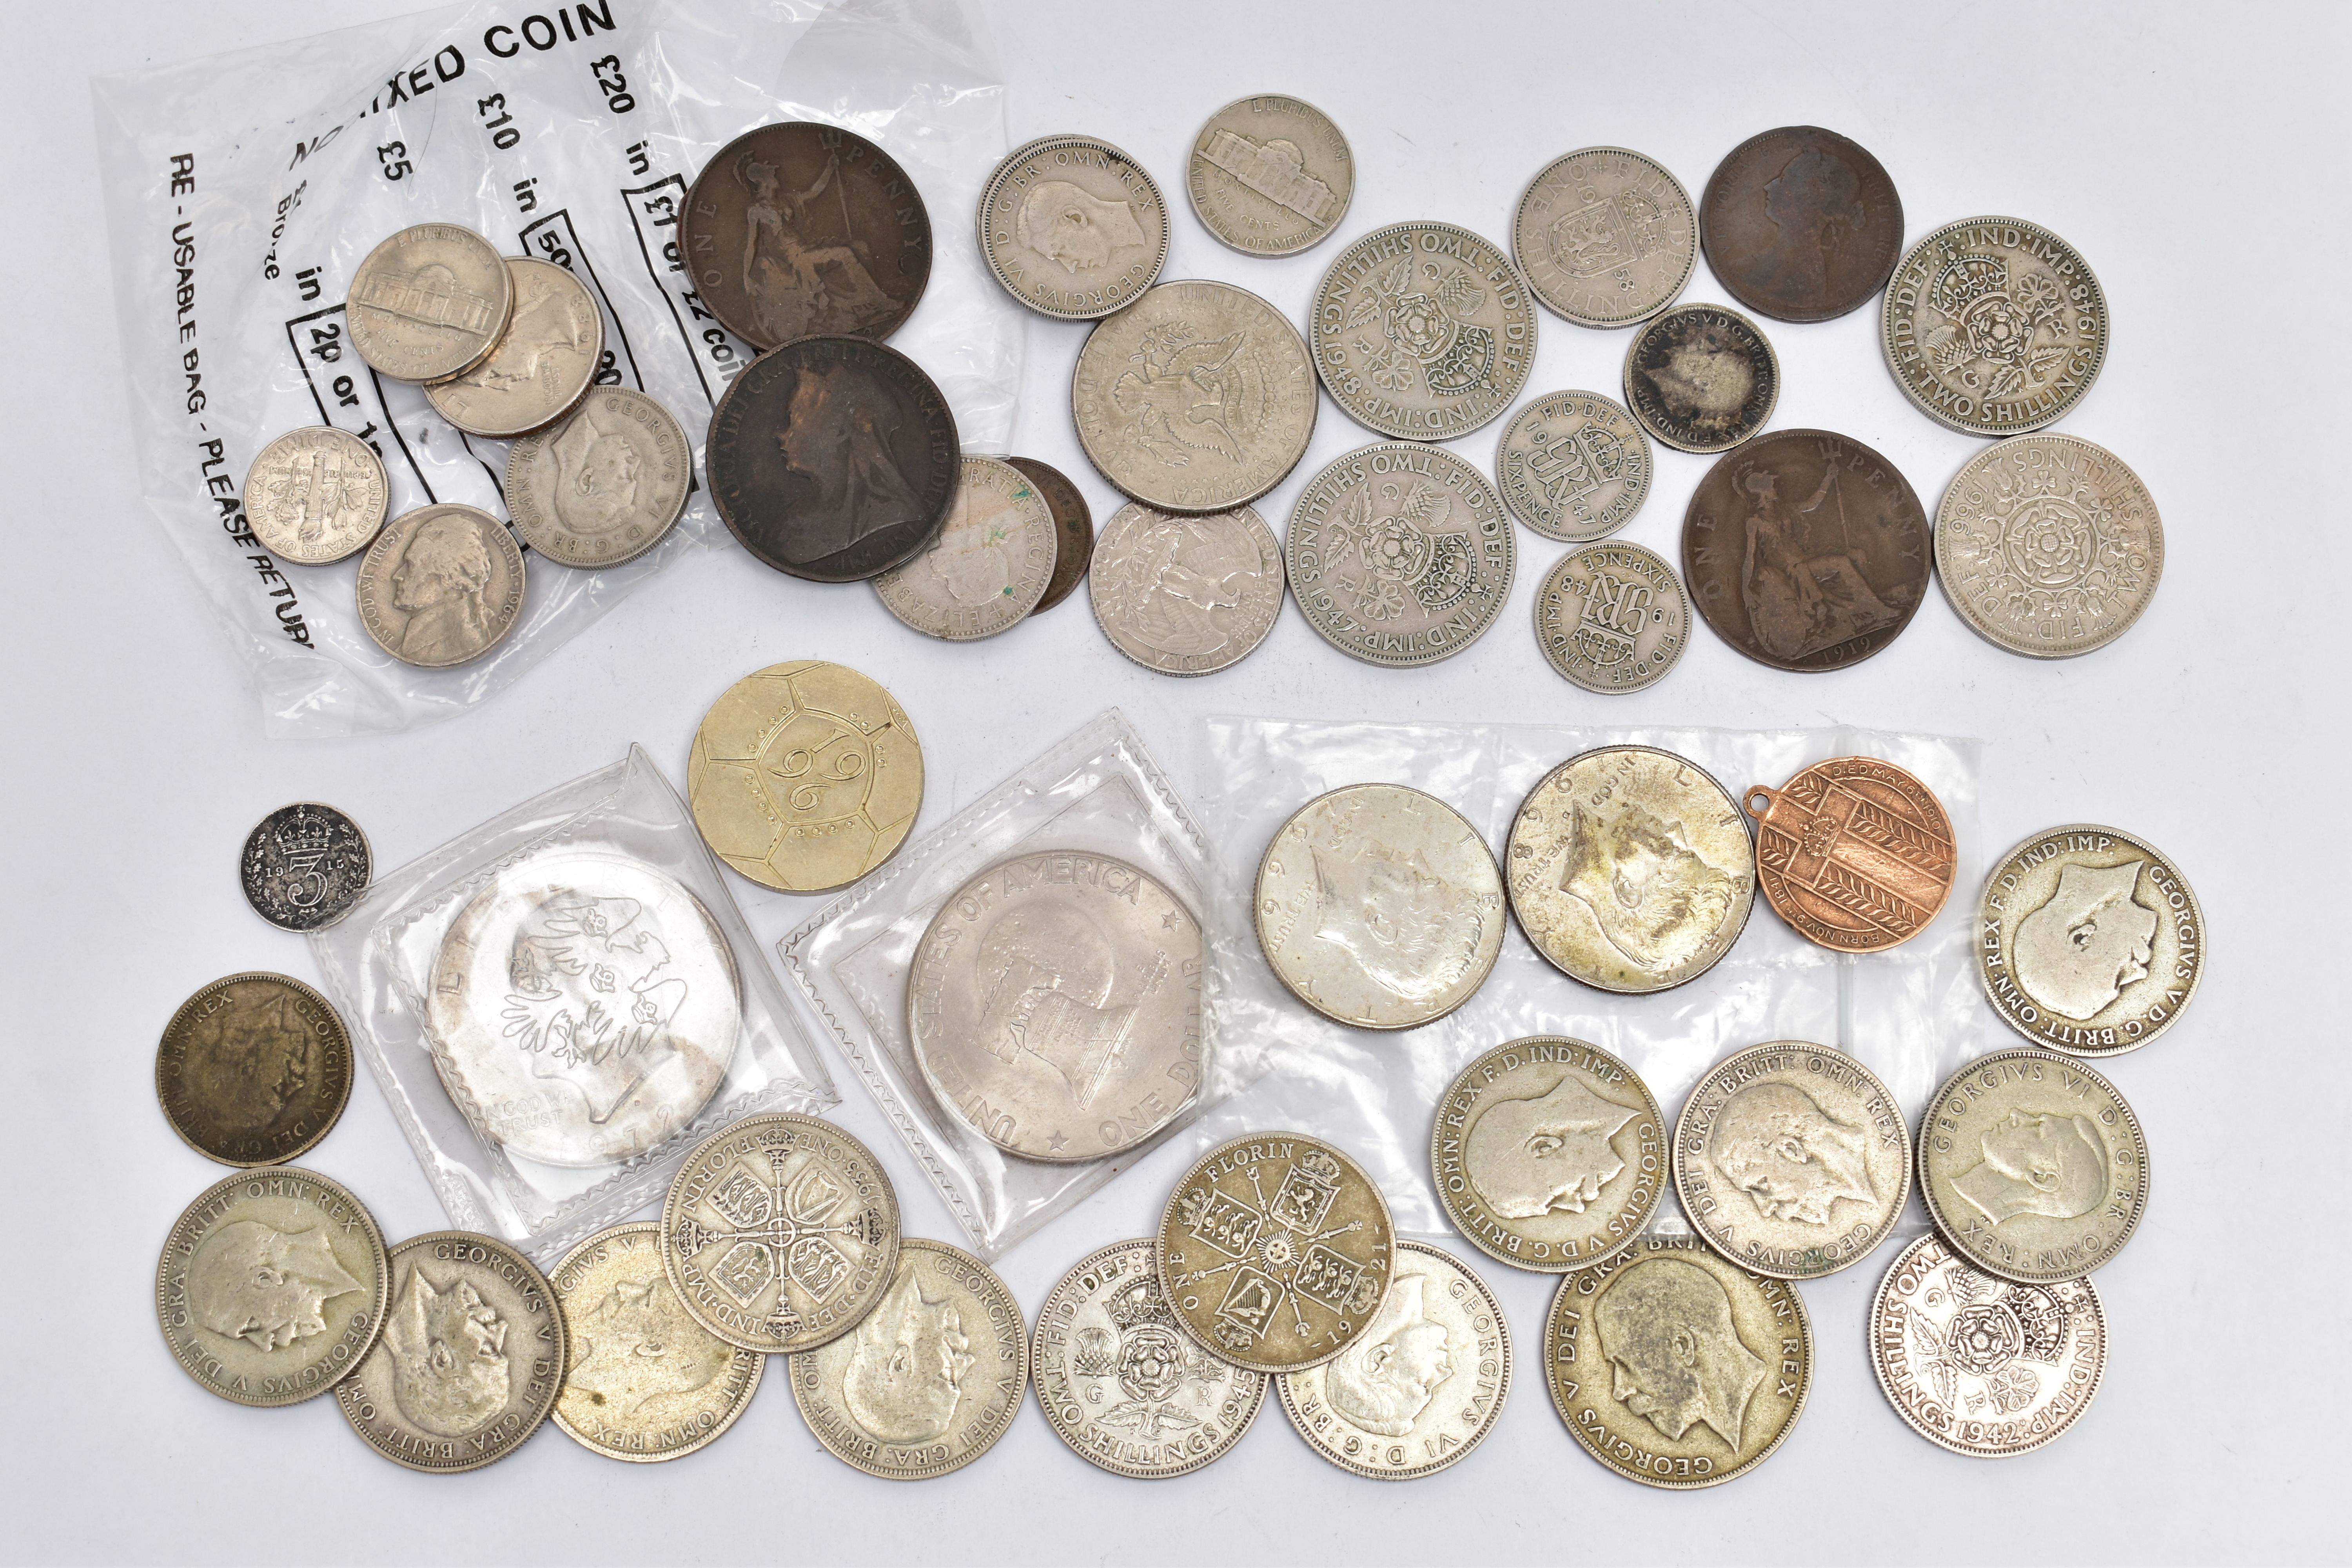 A PLASTIC BAG CONTAINING 20th CENTURY OVER 150 gr .500 SILVER COINS other Silver coins etc